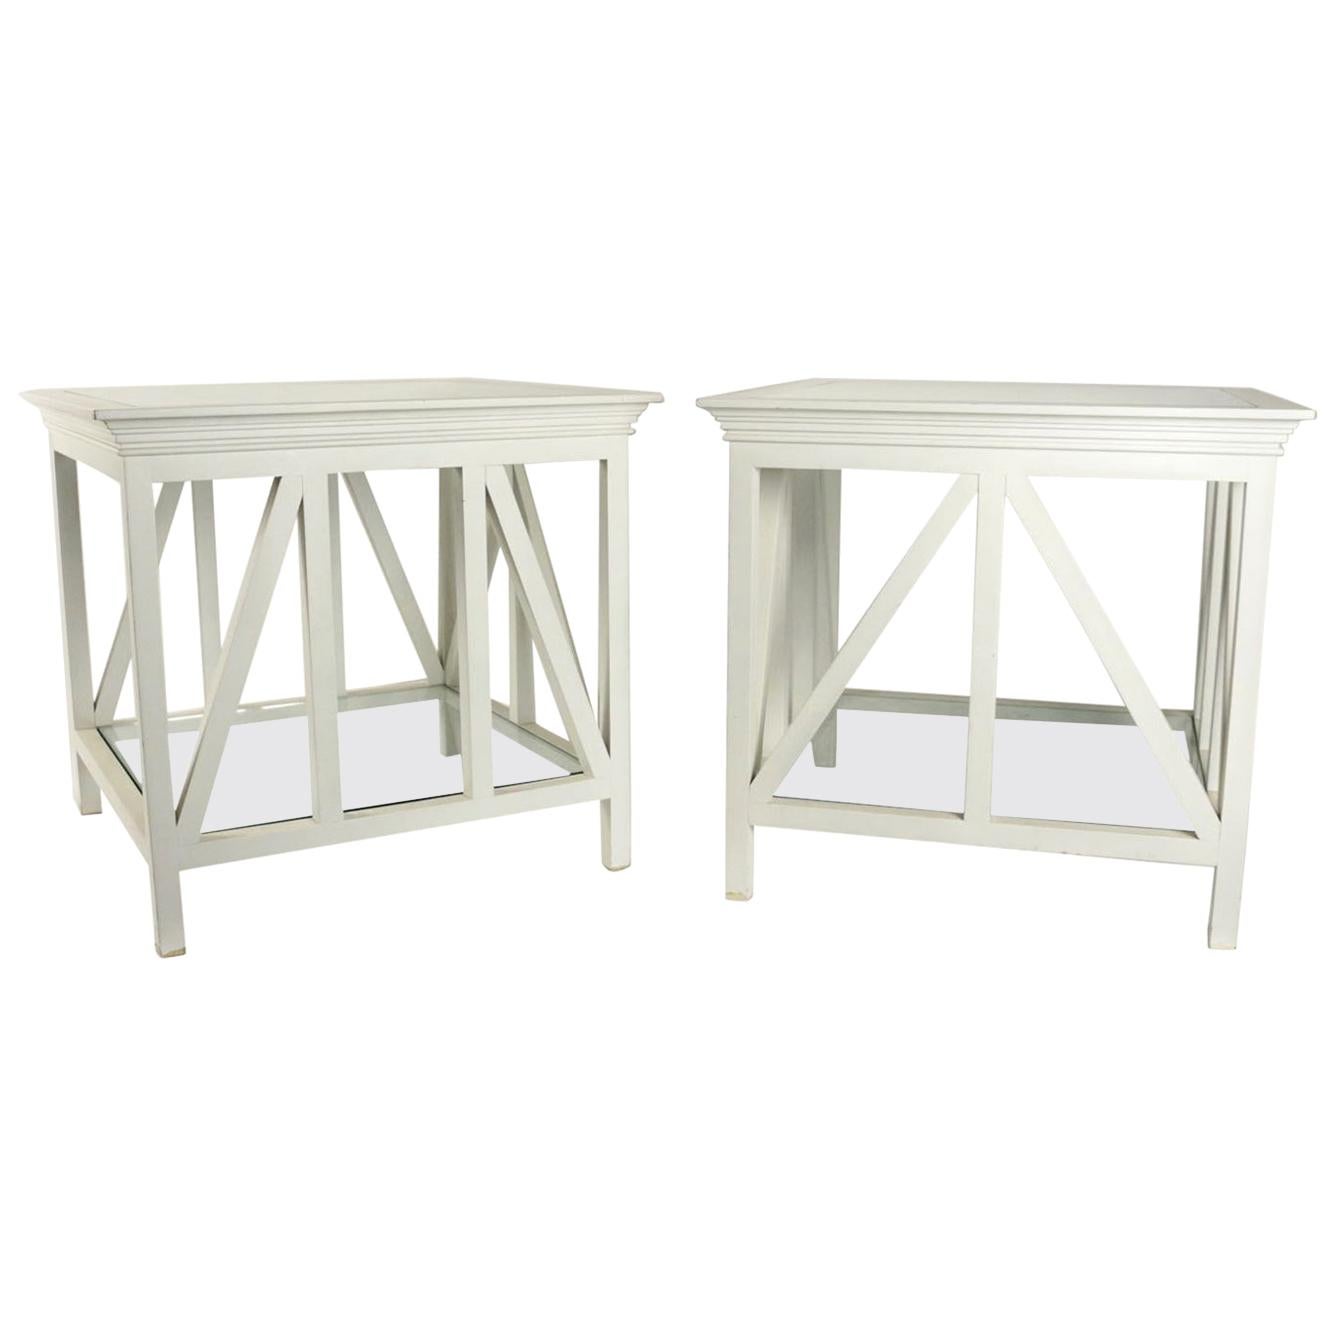 Pair of White Painted Sofa or Night Tables, circa 1990